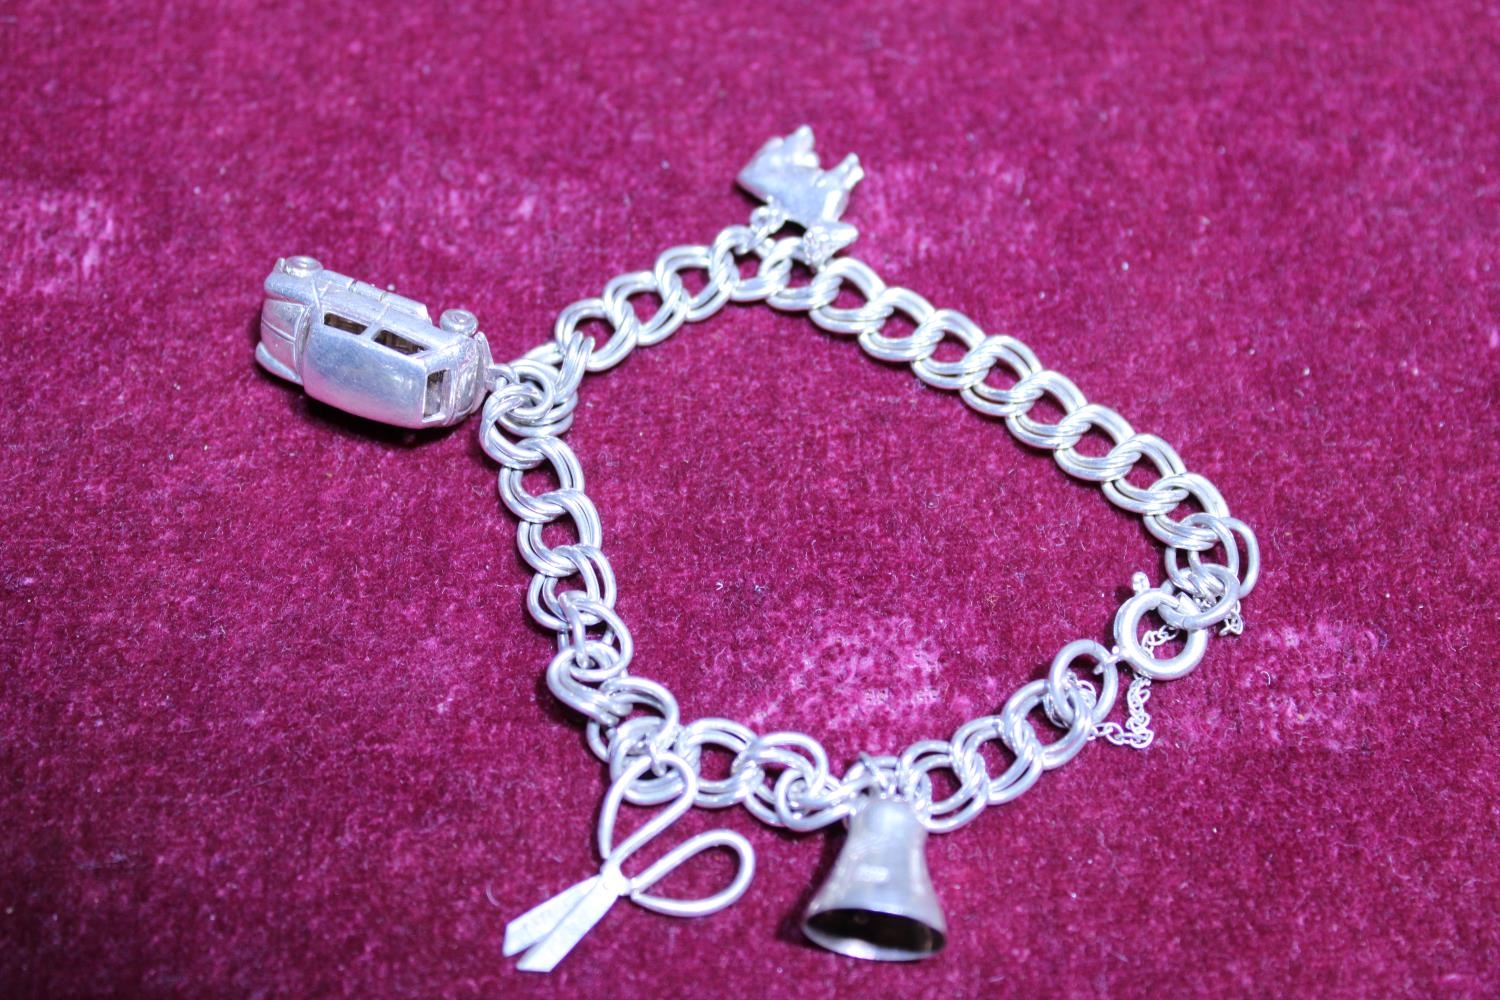 A white metal bracelet and a selection of white metal charms